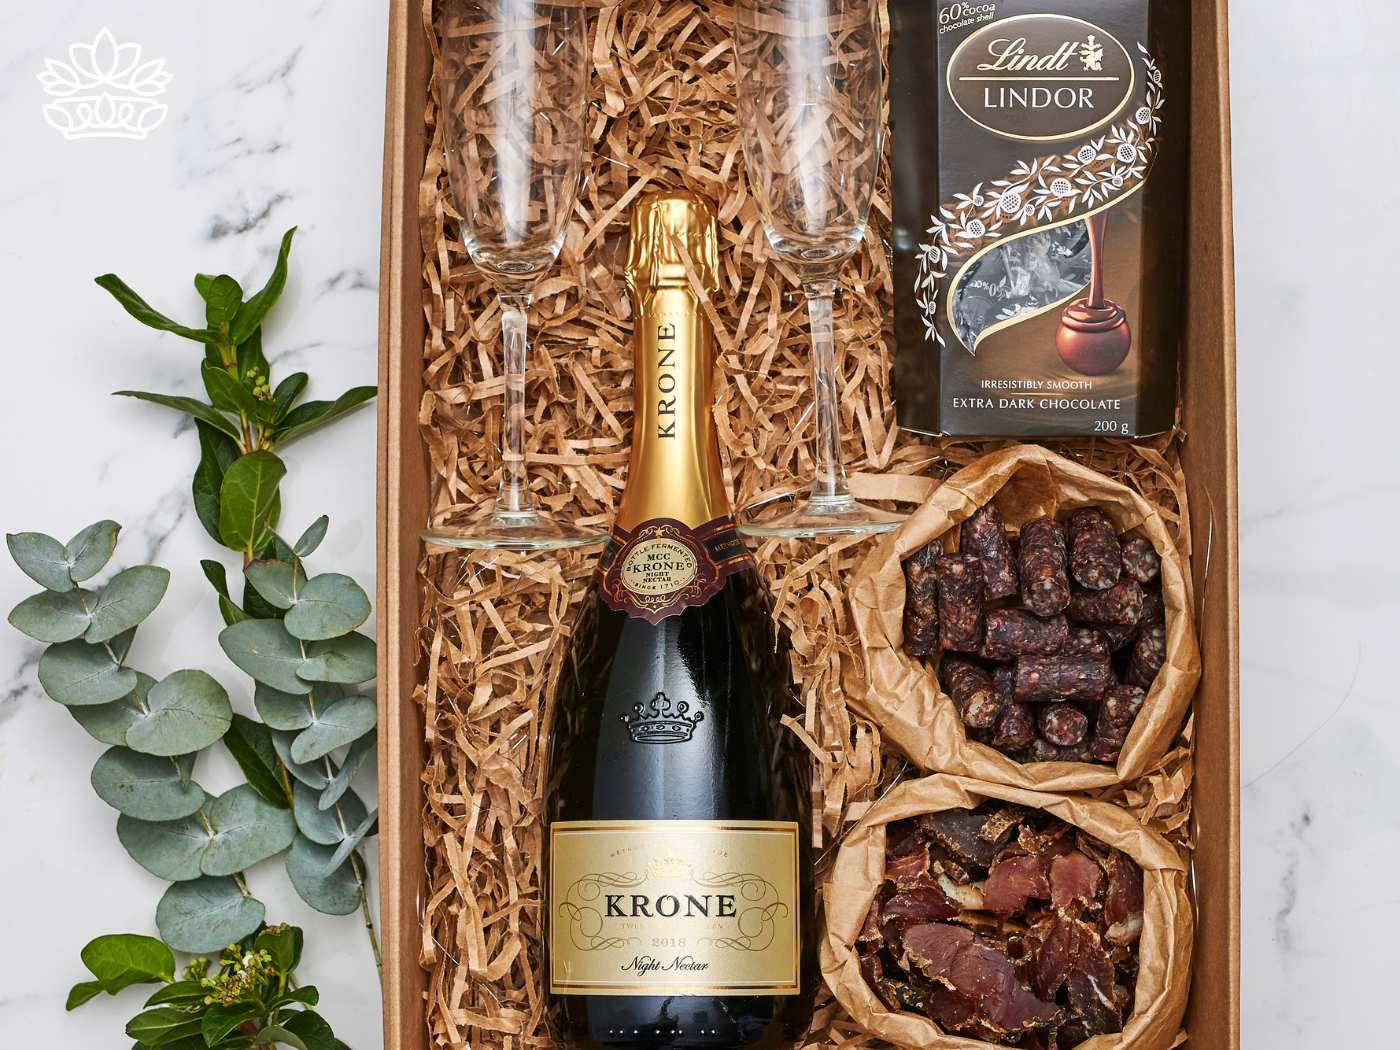 Elegant gift set featuring a bottle of Krone Night Nectar sparkling wine, a crystal flute, Lindt extra dark chocolate, and gourmet dried meats, all beautifully arranged in a wooden crate with natural fill. Graduation. Delivered with Heart. Fabulous Flowers and Gifts.